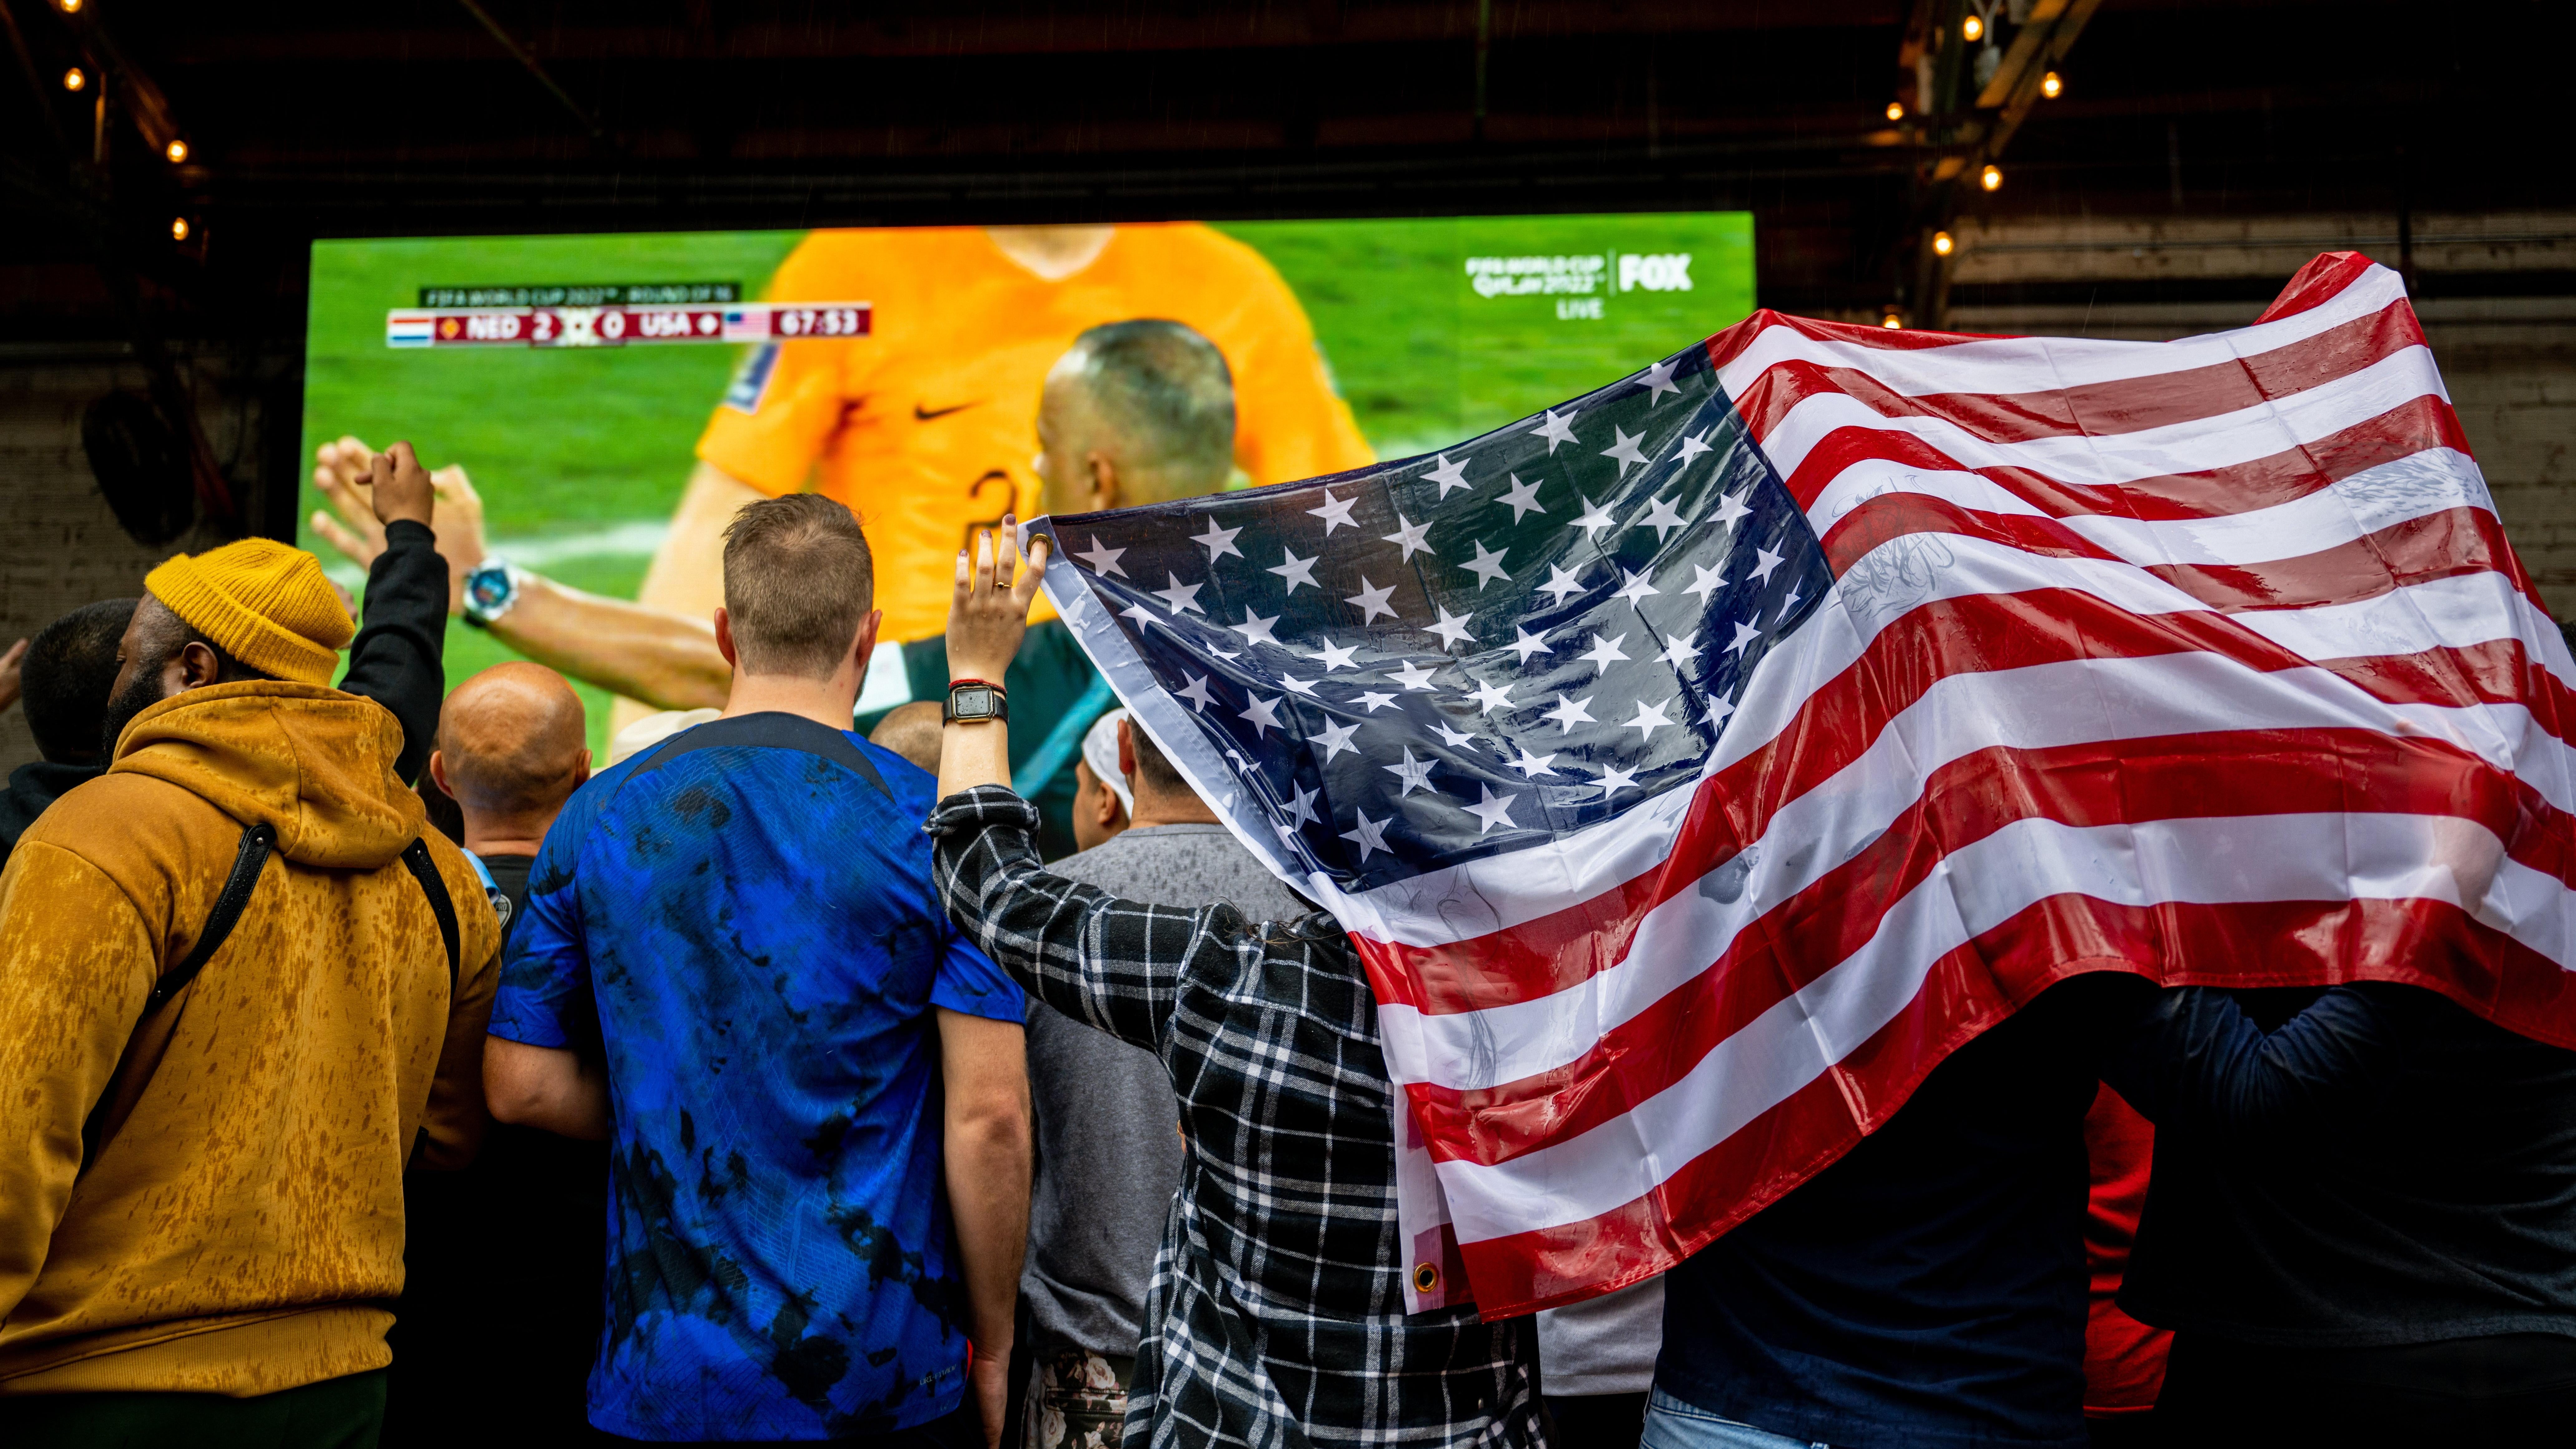 U.S. football fans watch the world cup in the U.S. team's game against the Netherlands. (Photo: Brandon Bell, Getty Images)